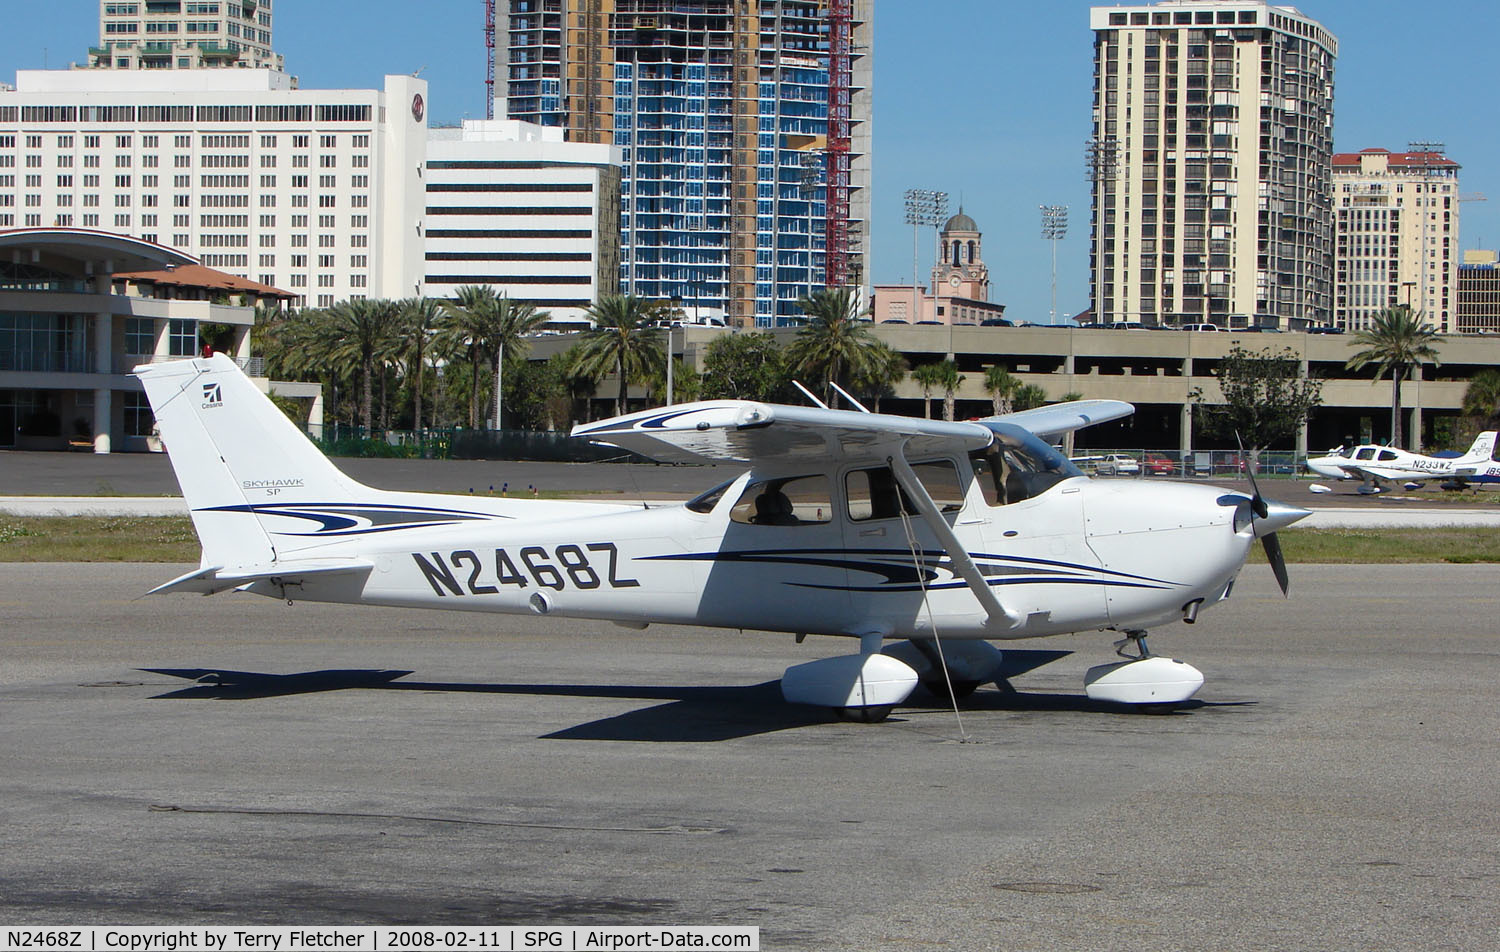 N2468Z, 2005 Cessna 172S C/N 172S10065, part of the GA scene at Albert Whitted airport in St.Petersburg , Florida